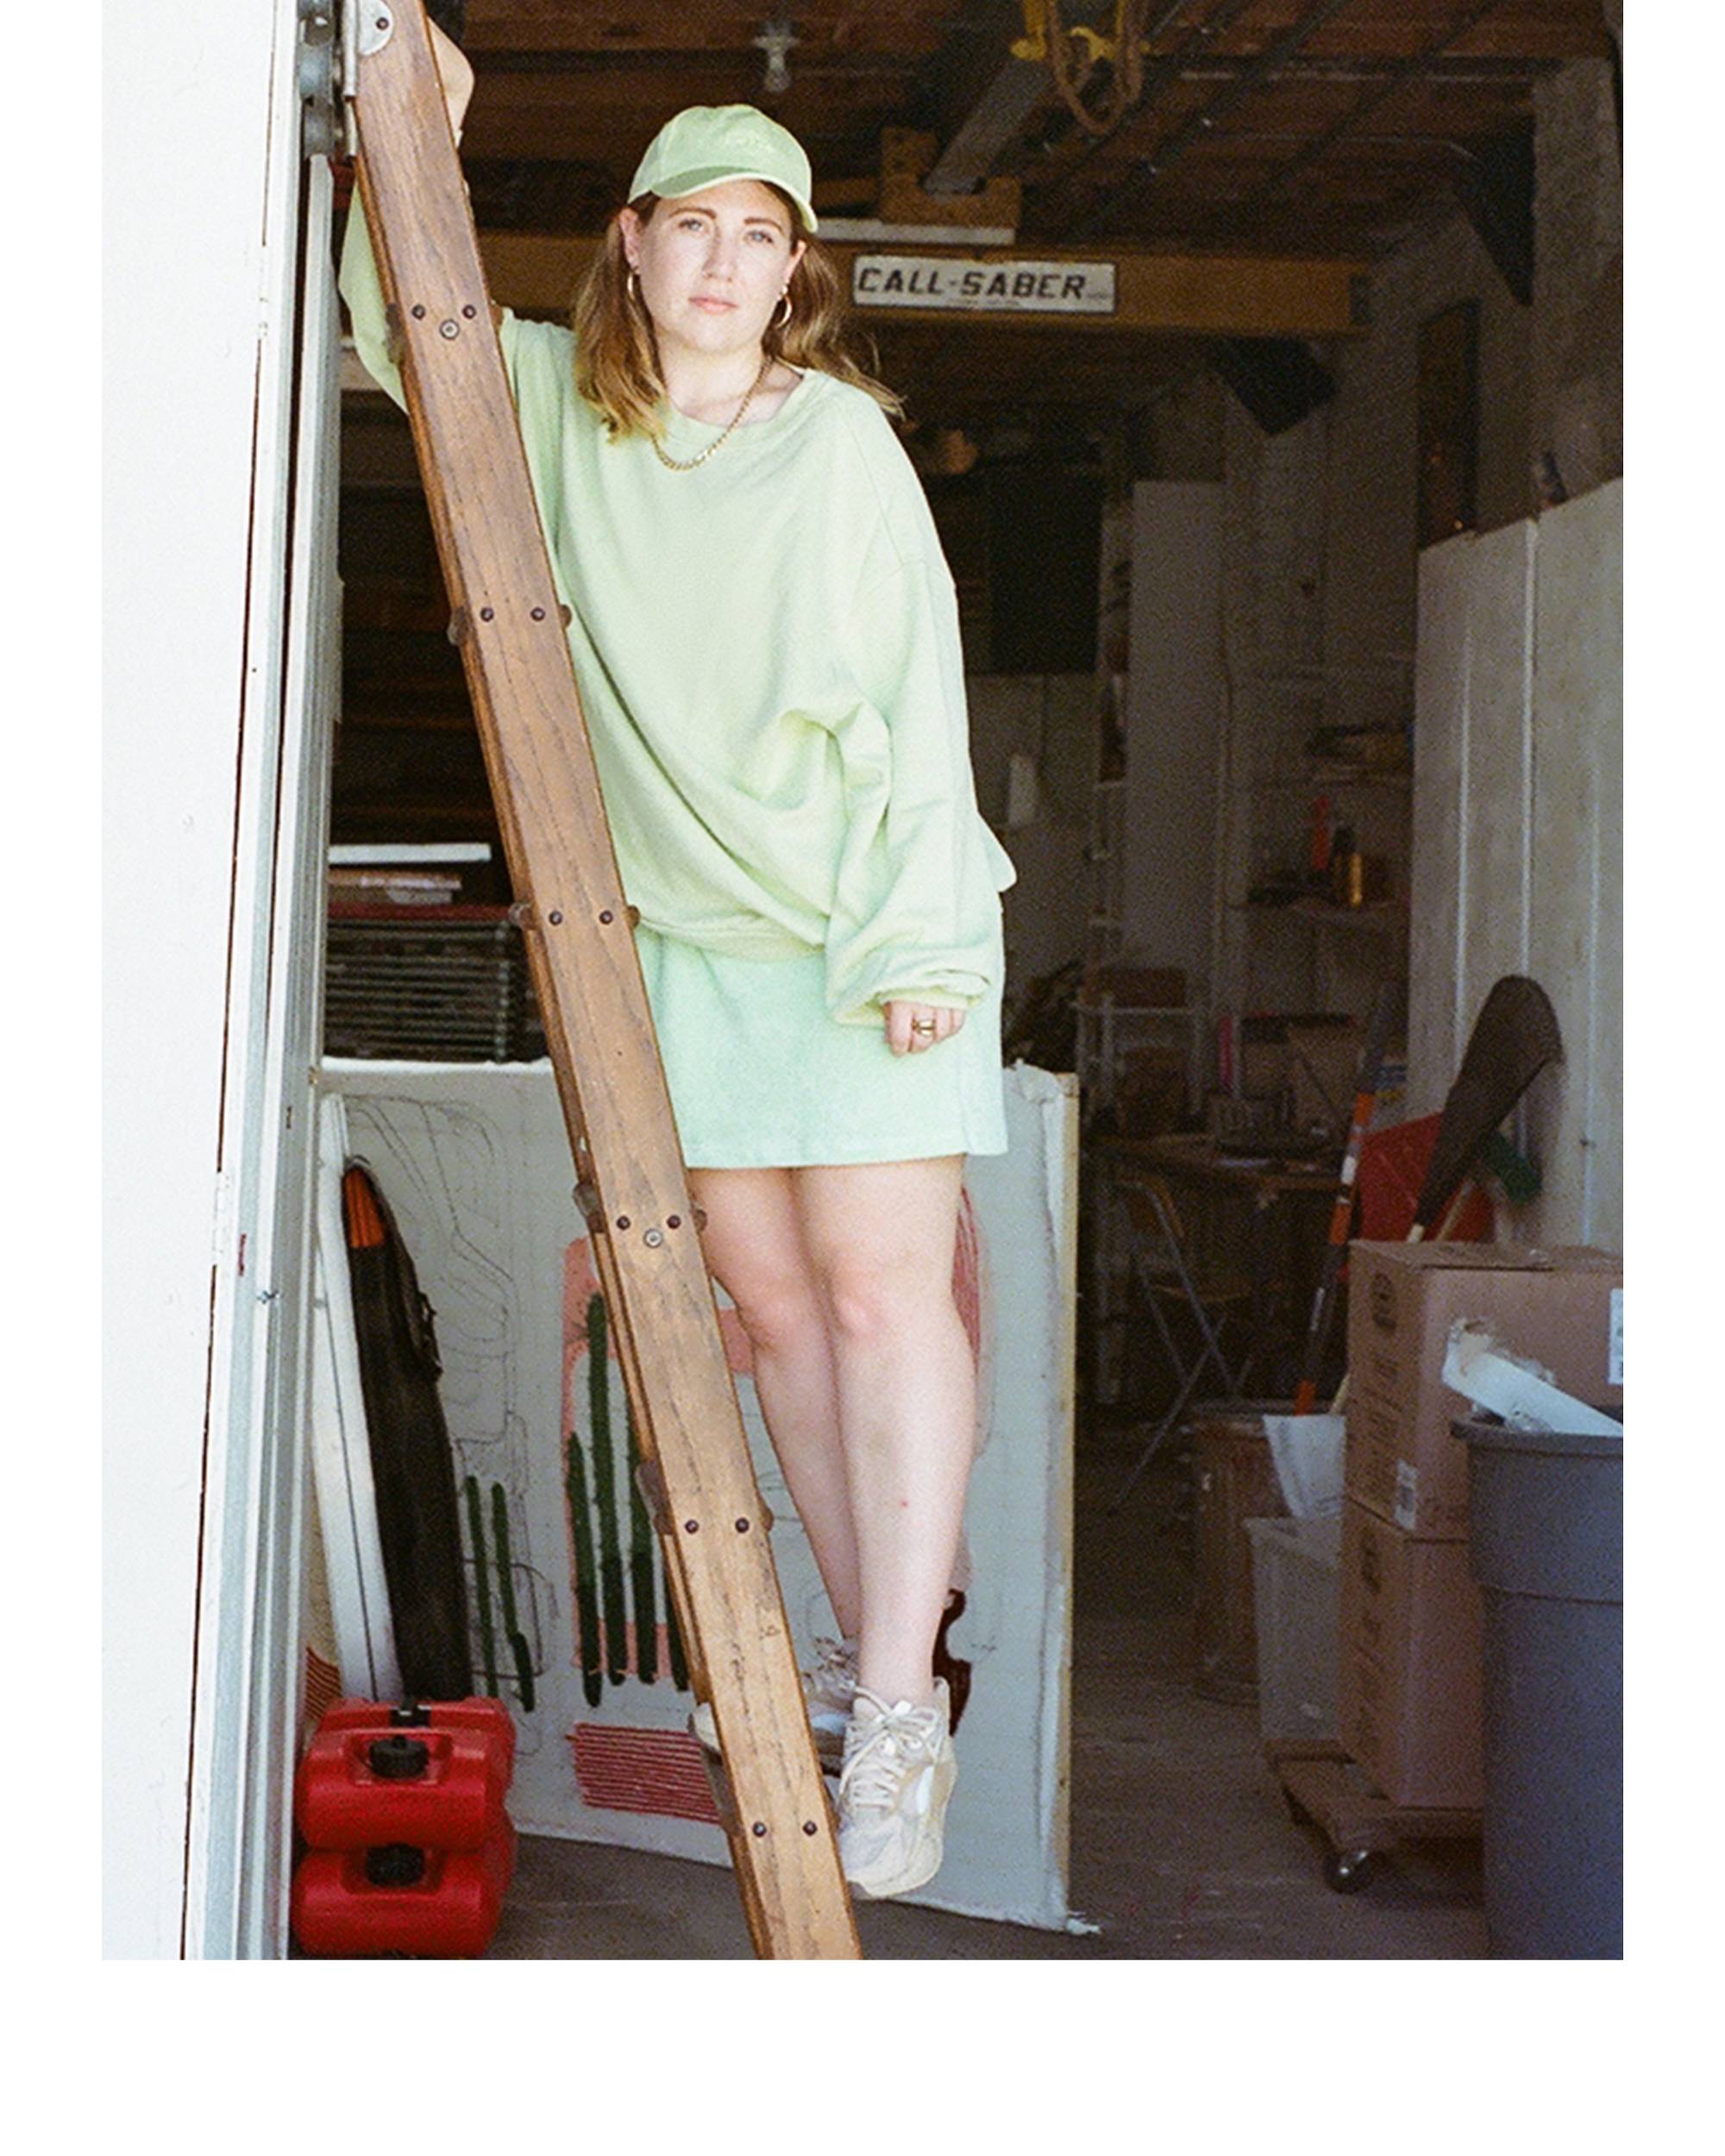 Caroline Kaufman wearing a levis outfit standing on a ladder in a garage with art in the background